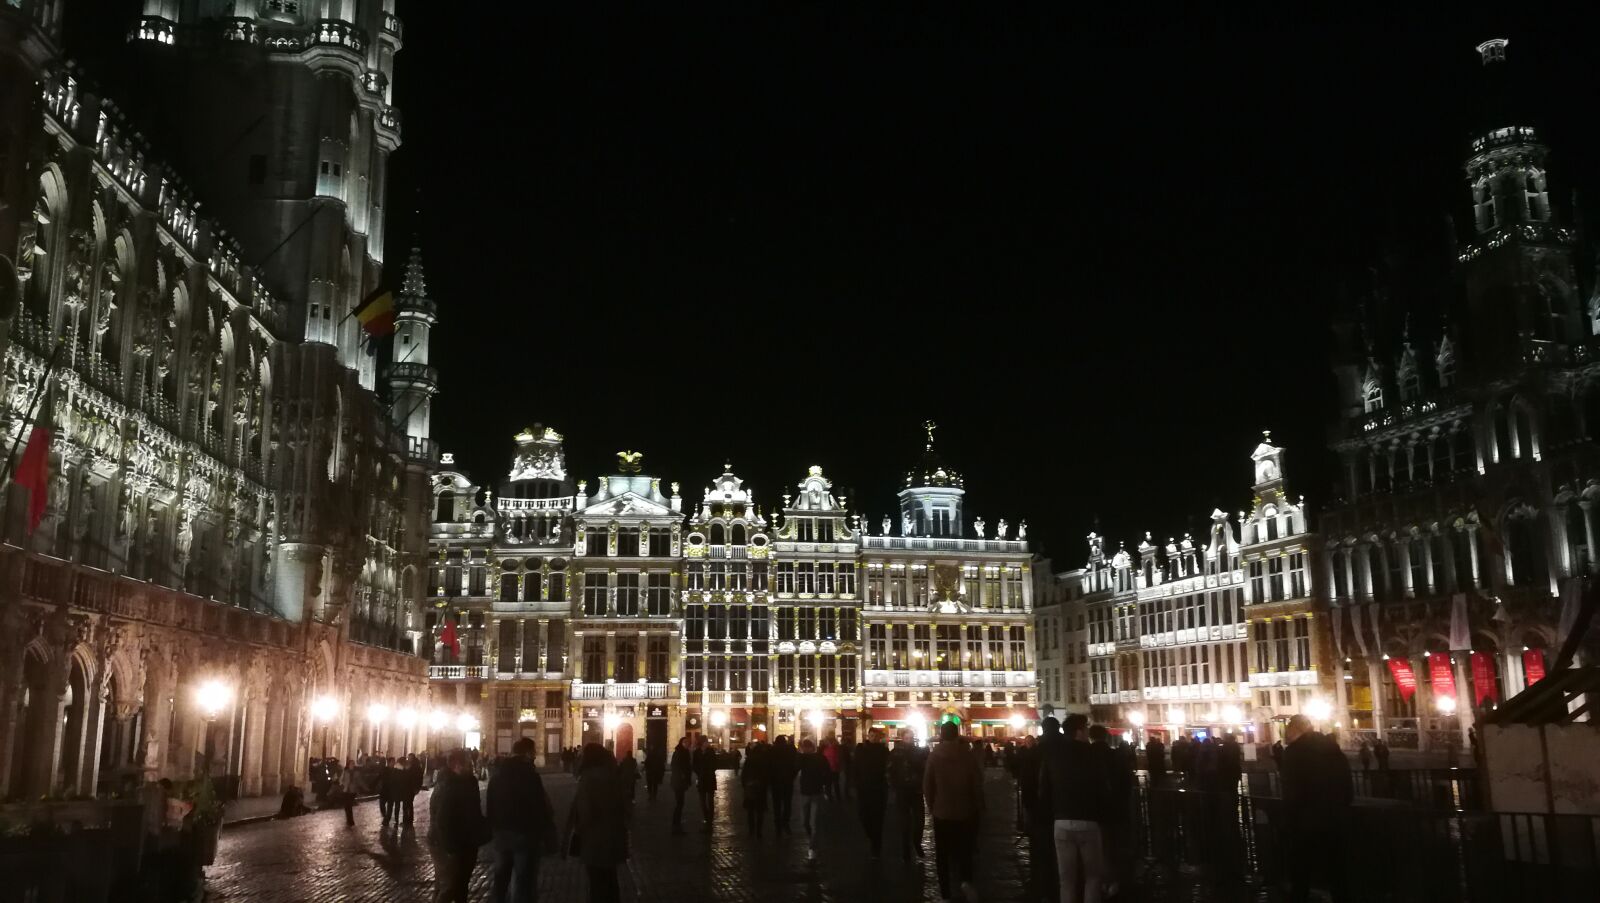 HUAWEI P10 sample photo. Place, brussels, night photography